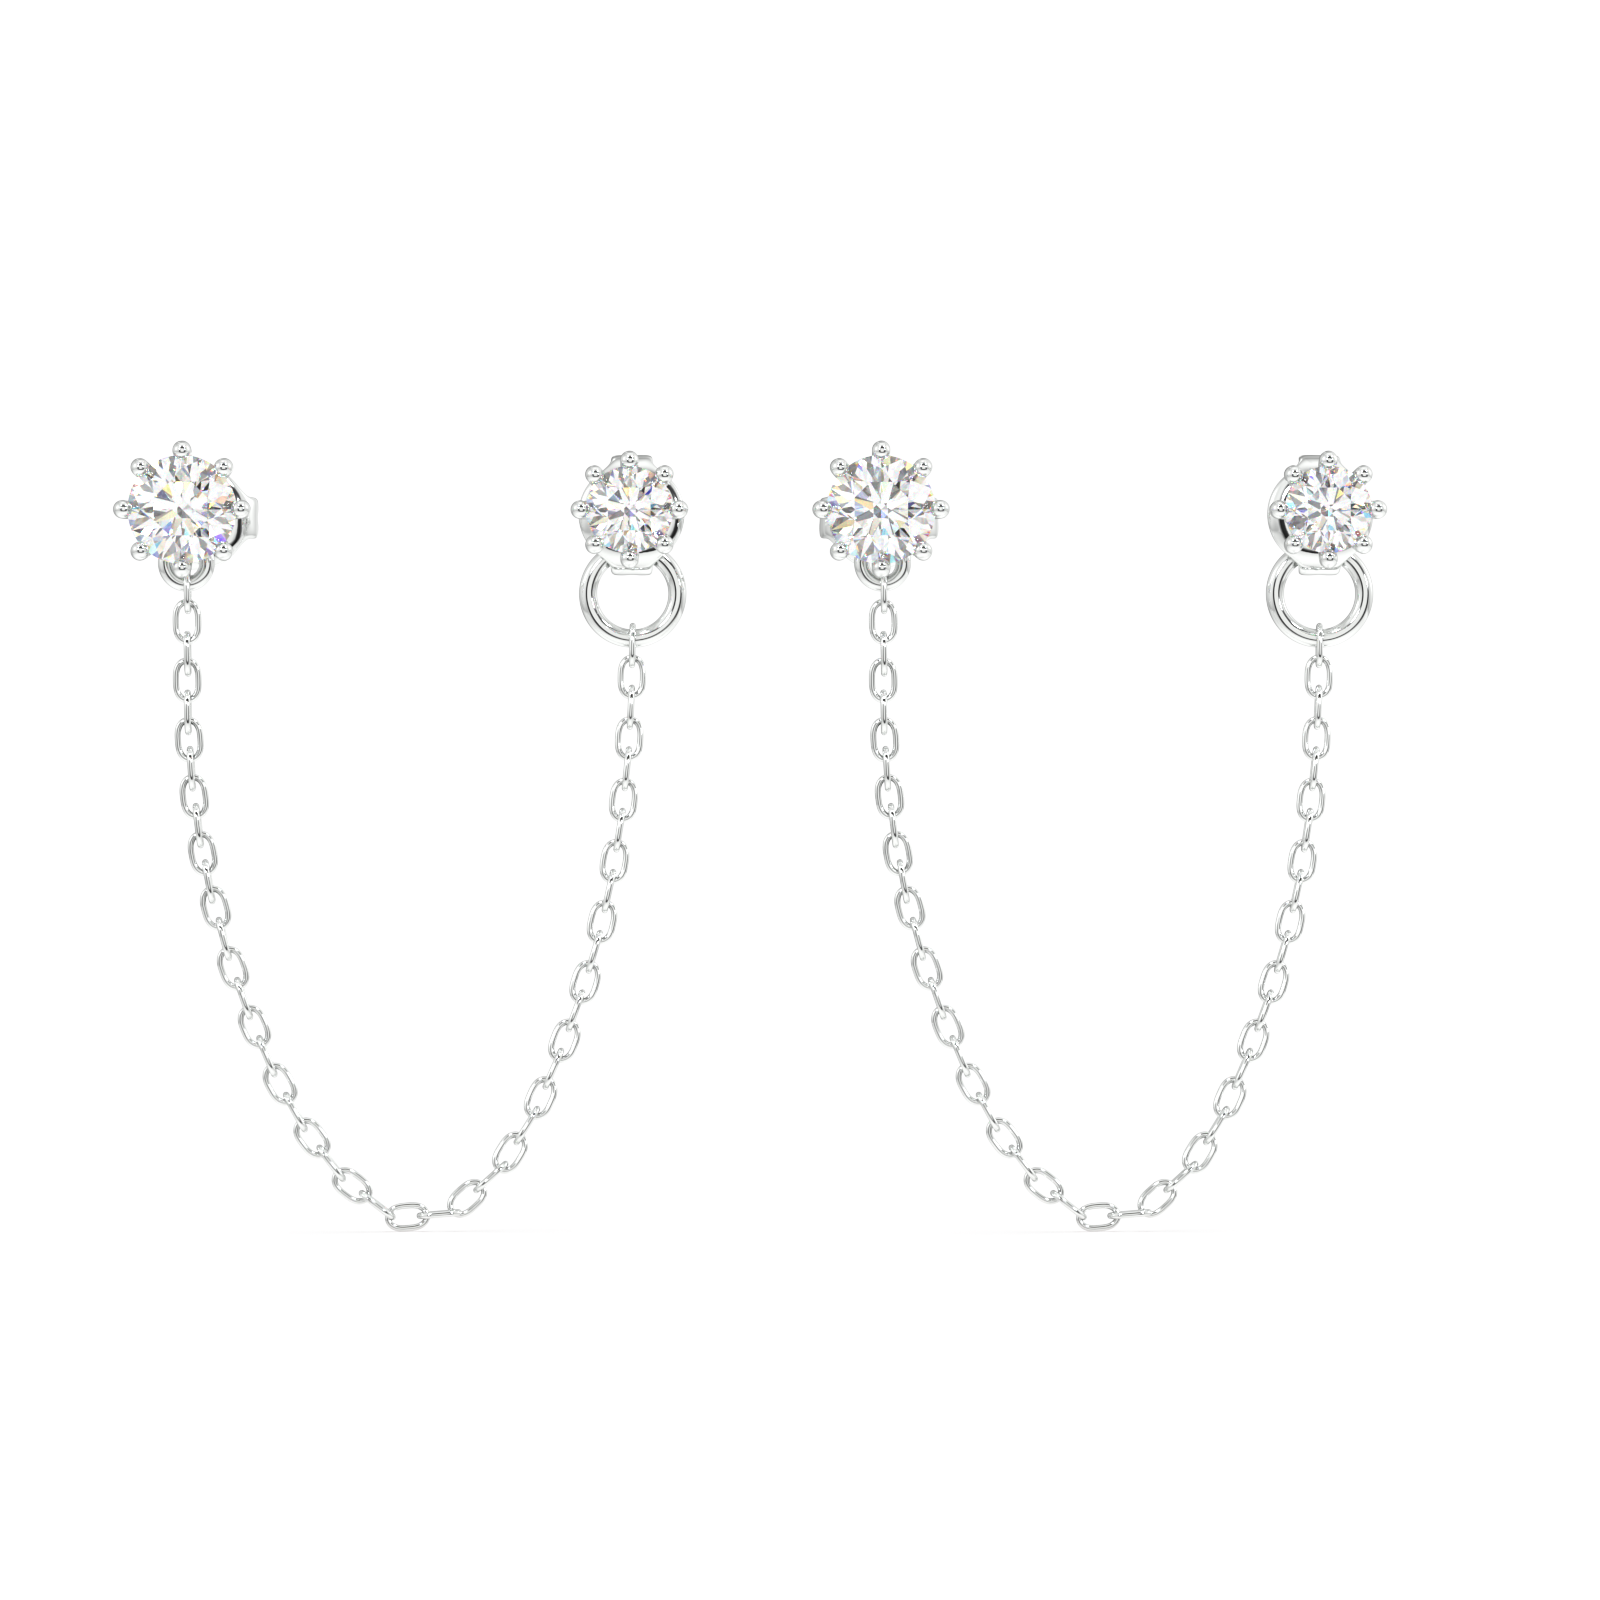 Single solitaire - 3 in 1 chain connector